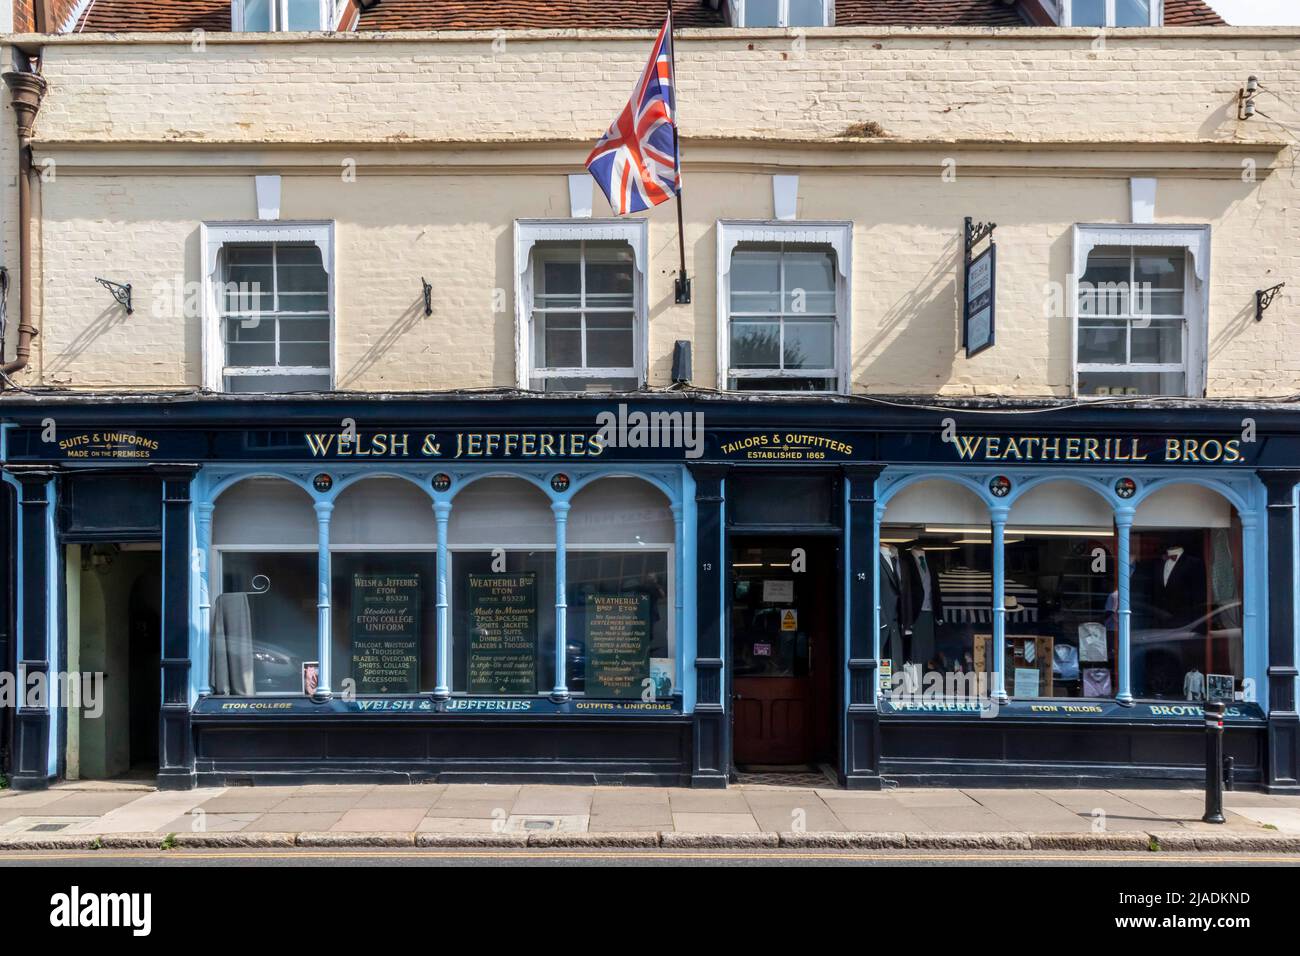 Welsh and Jefferies and Weatherill Brothers shops on the HIgh Street, Eton, Berkshire, England, UK Stock Photo